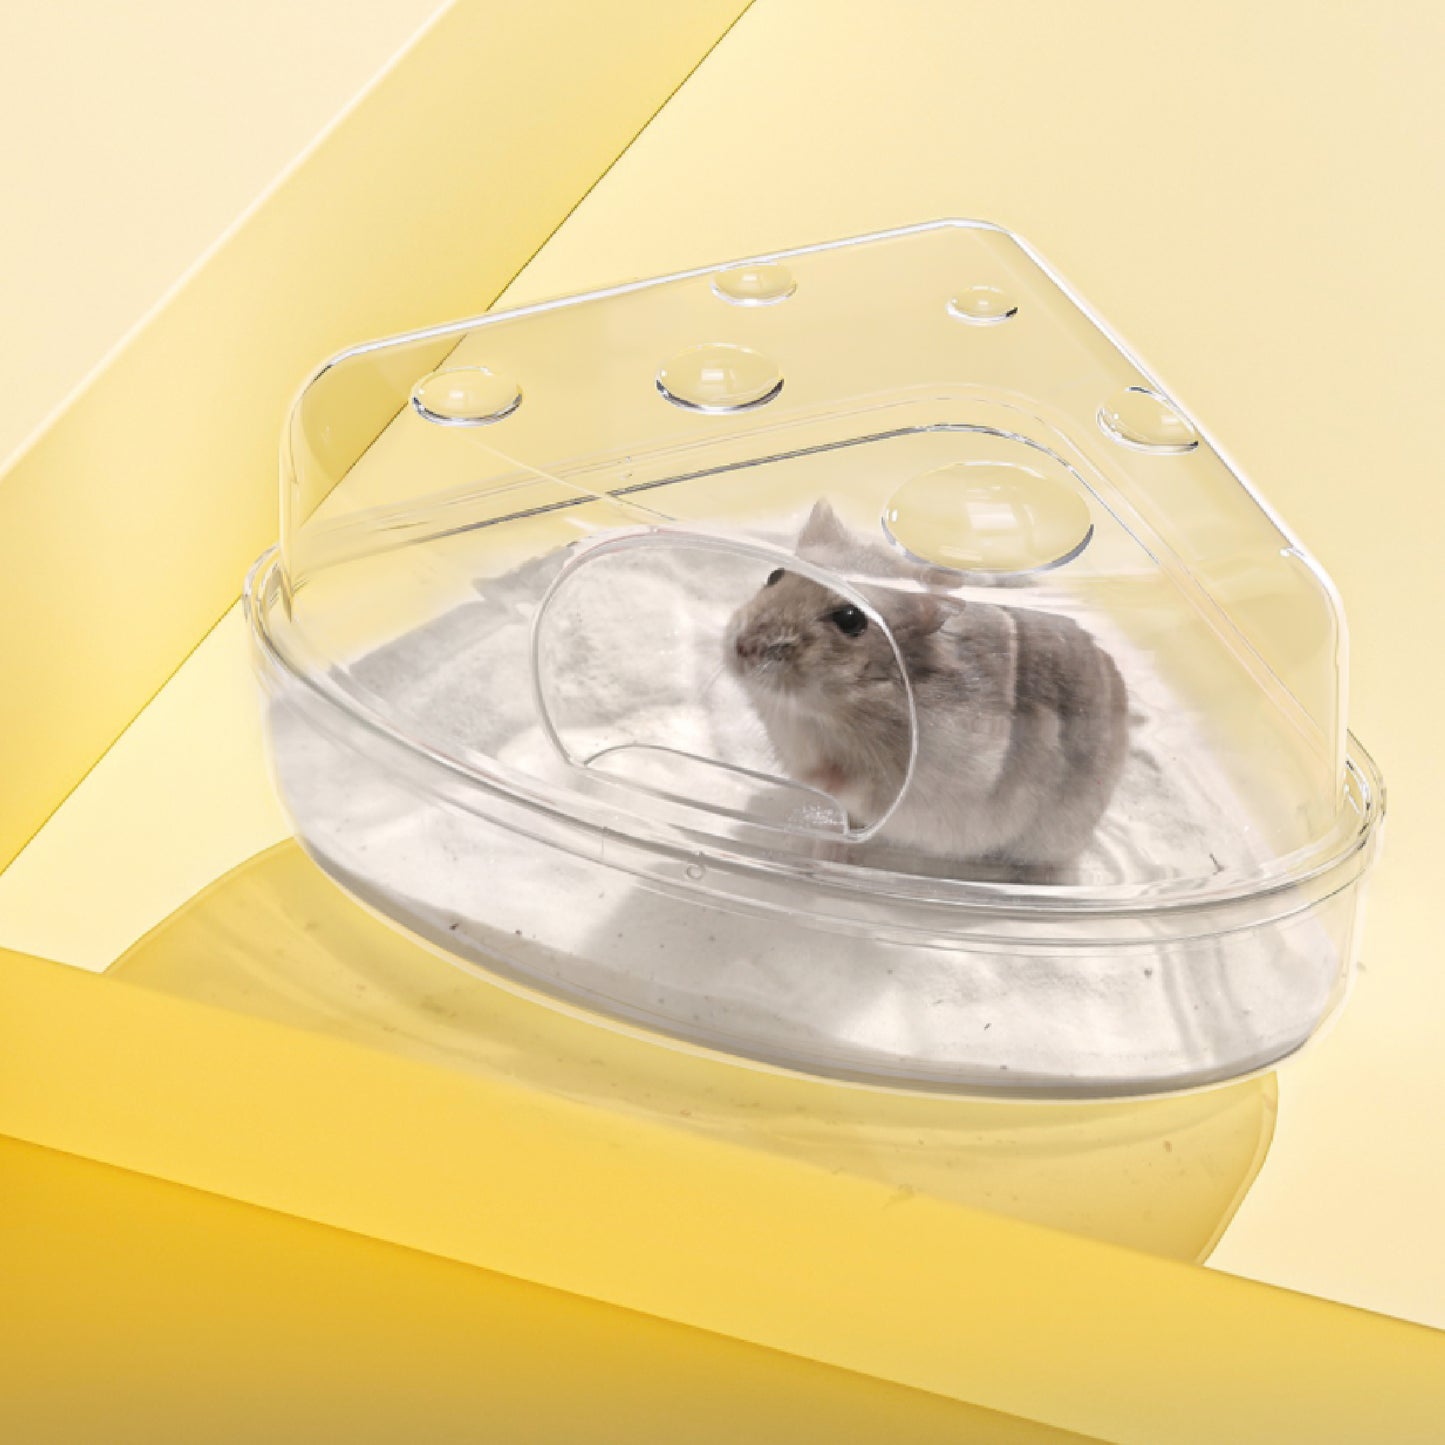 BUCATSTATE Hamster Sand Bath Container Cute Cheese Shaped